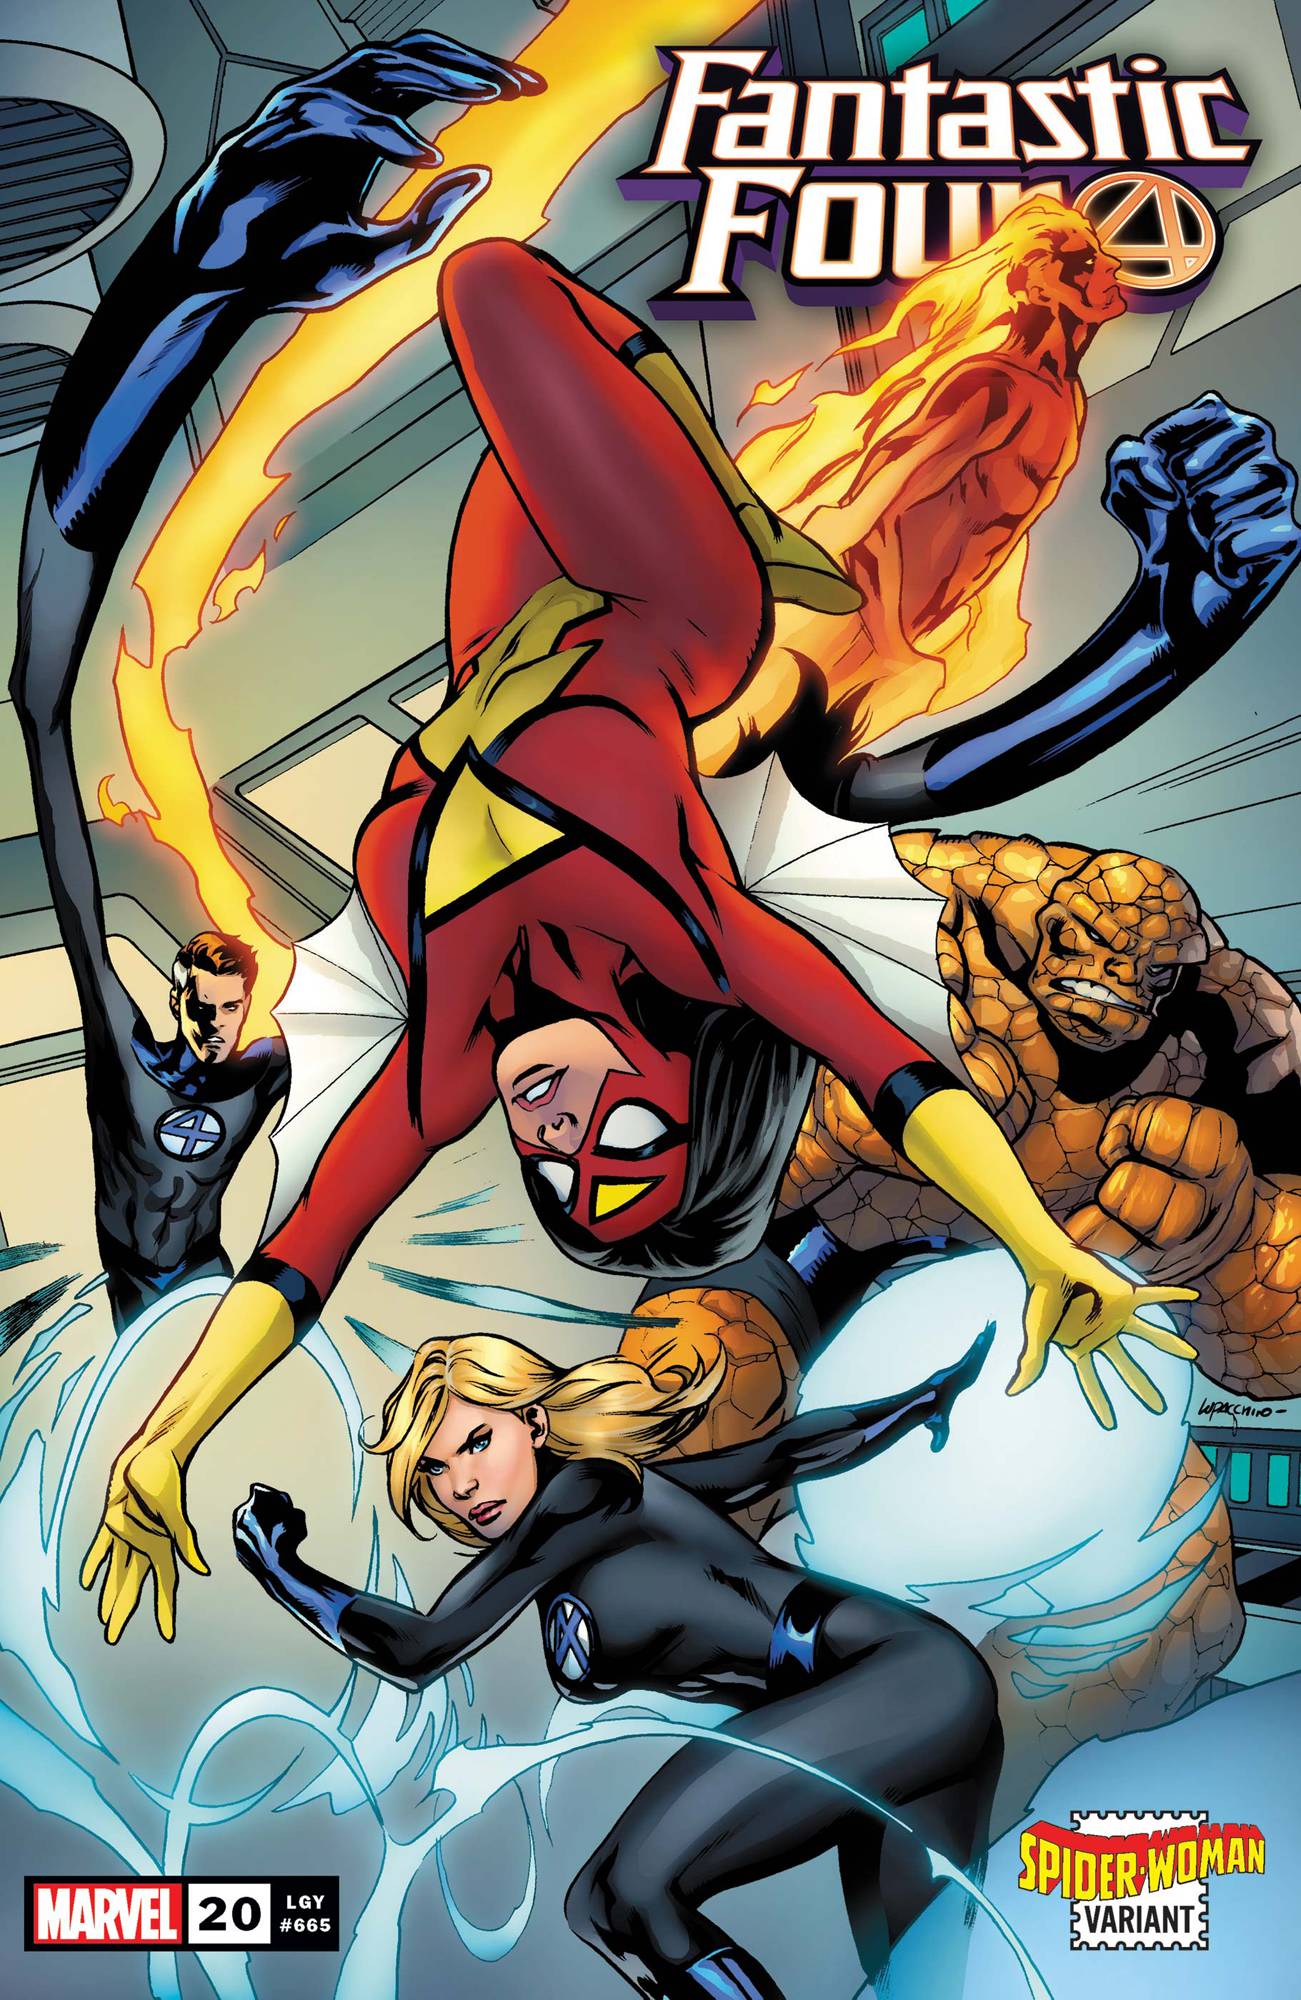 FANTASTIC FOUR #20 LUPACCHINO SPIDER-WOMAN VAR